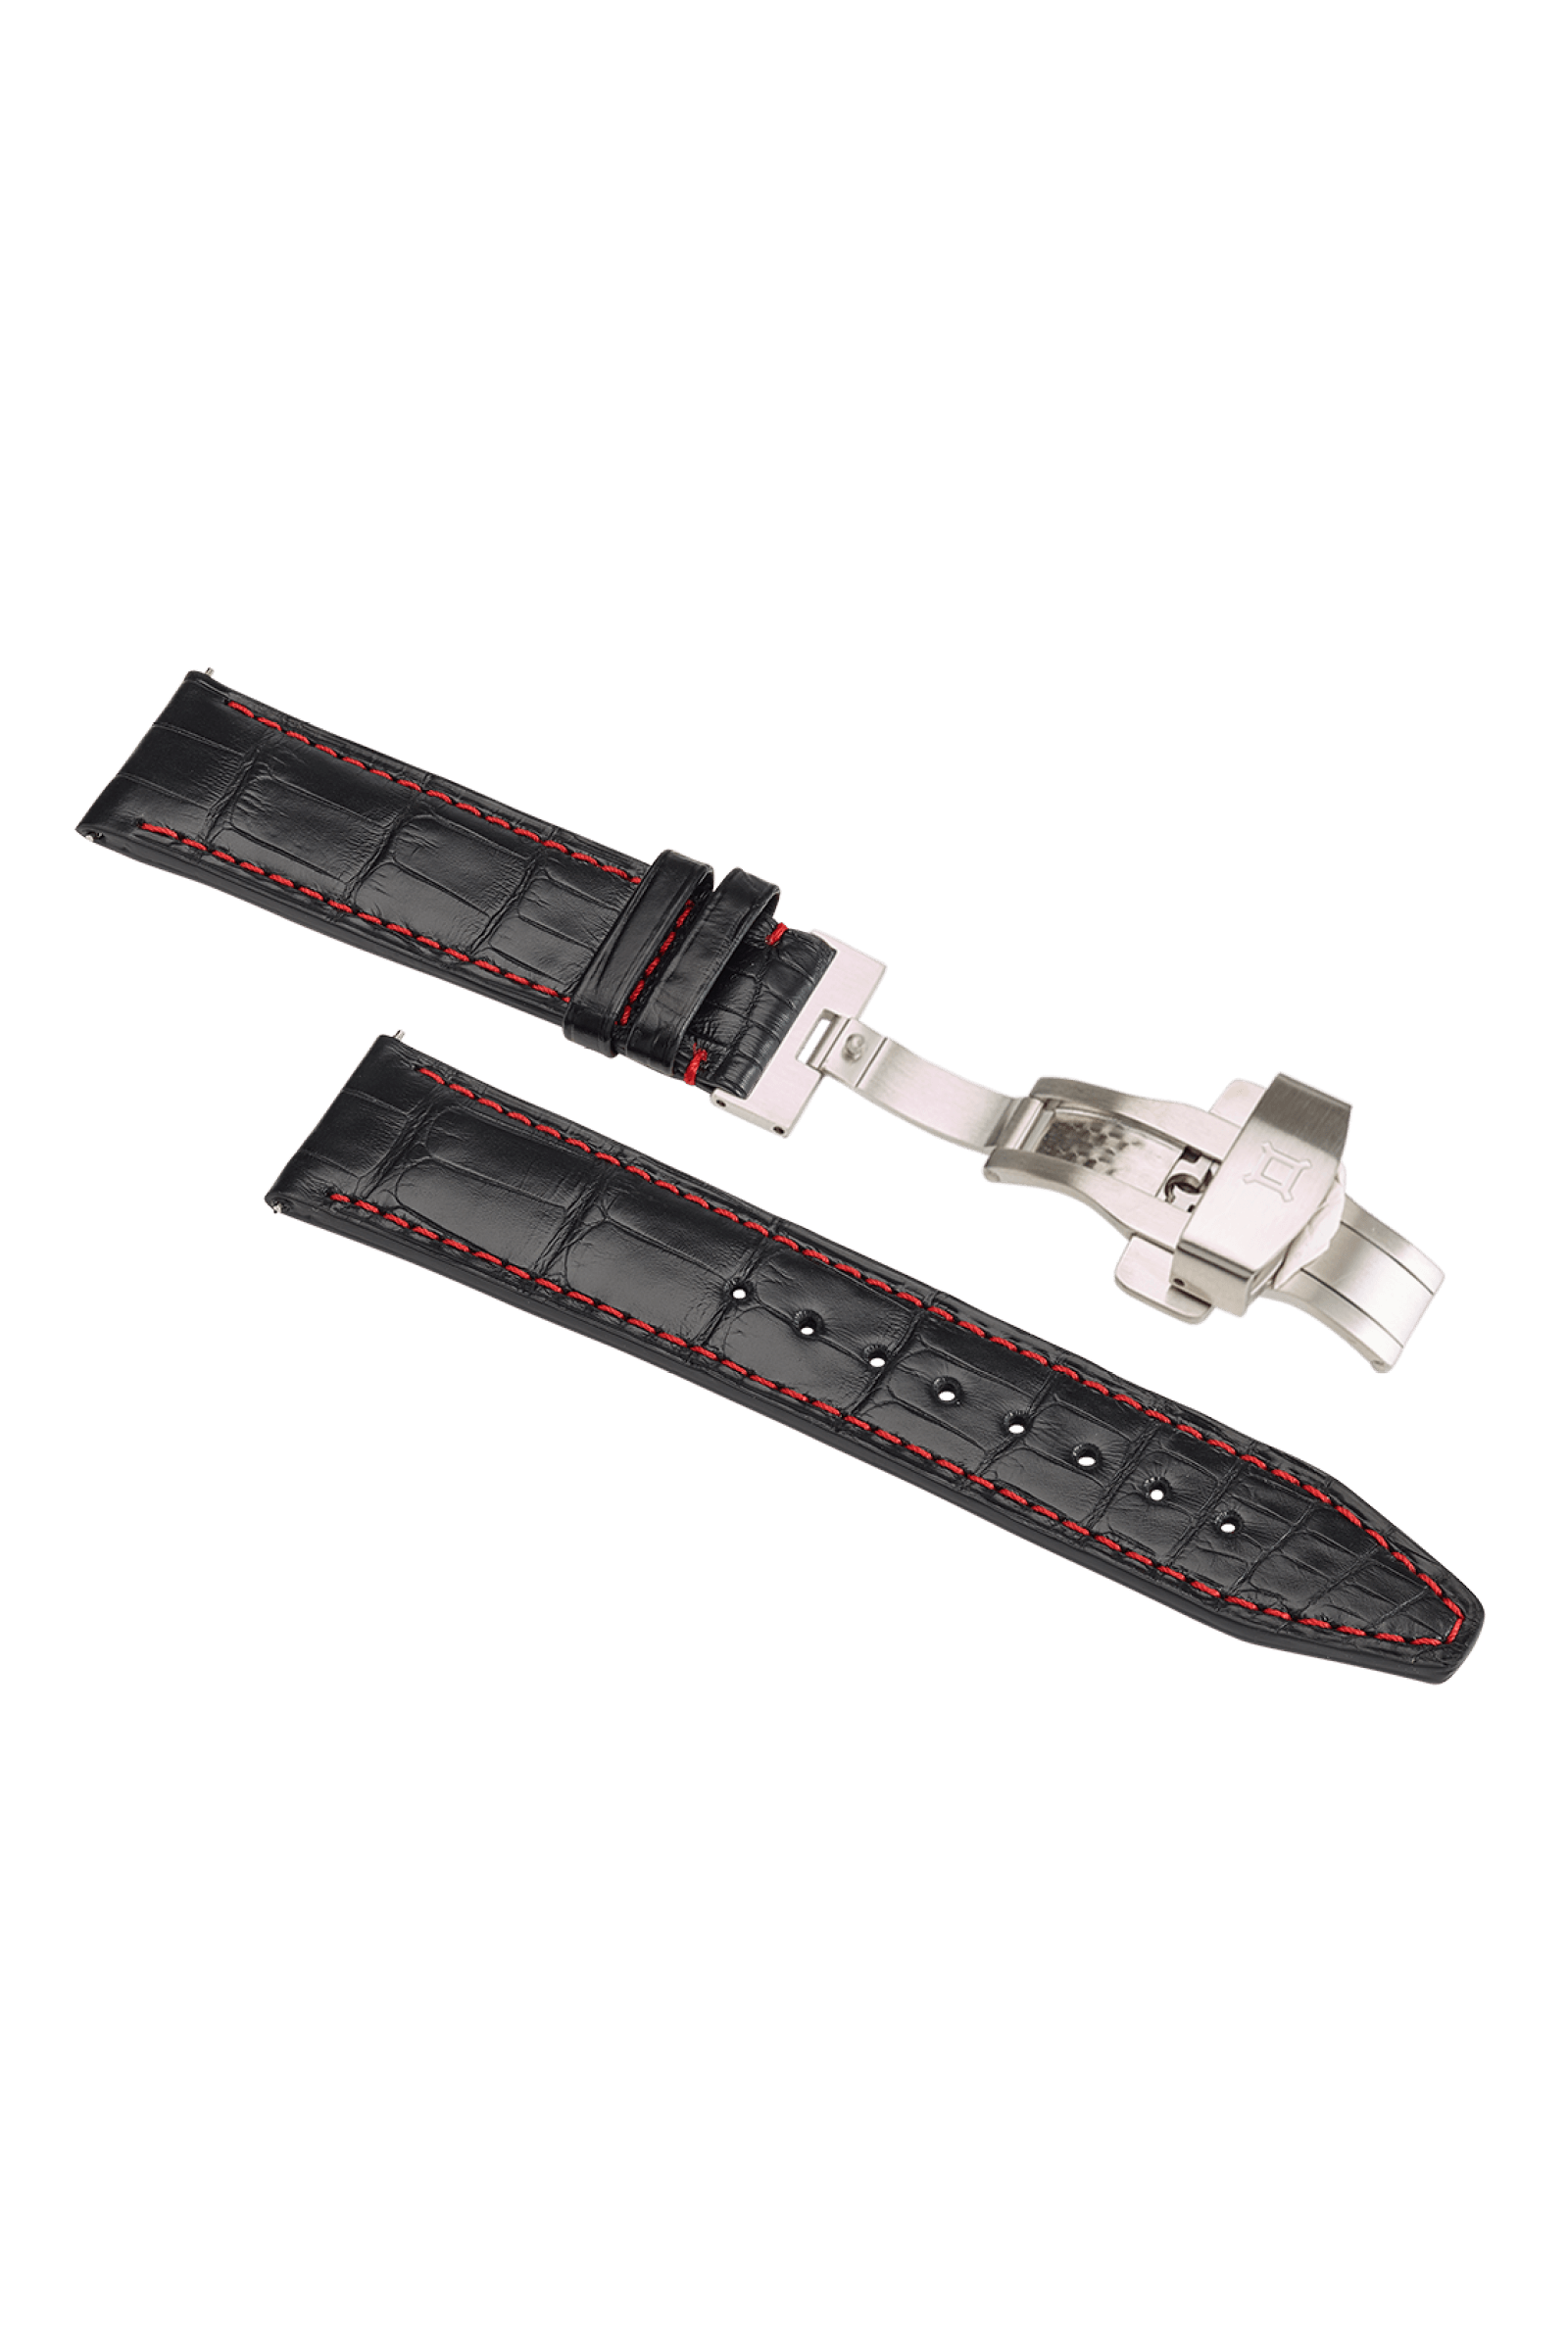 Supercharged Vintage Car Watch Strap in Black, Light Pinkish Grey, and Dark Greyish Blue Leather